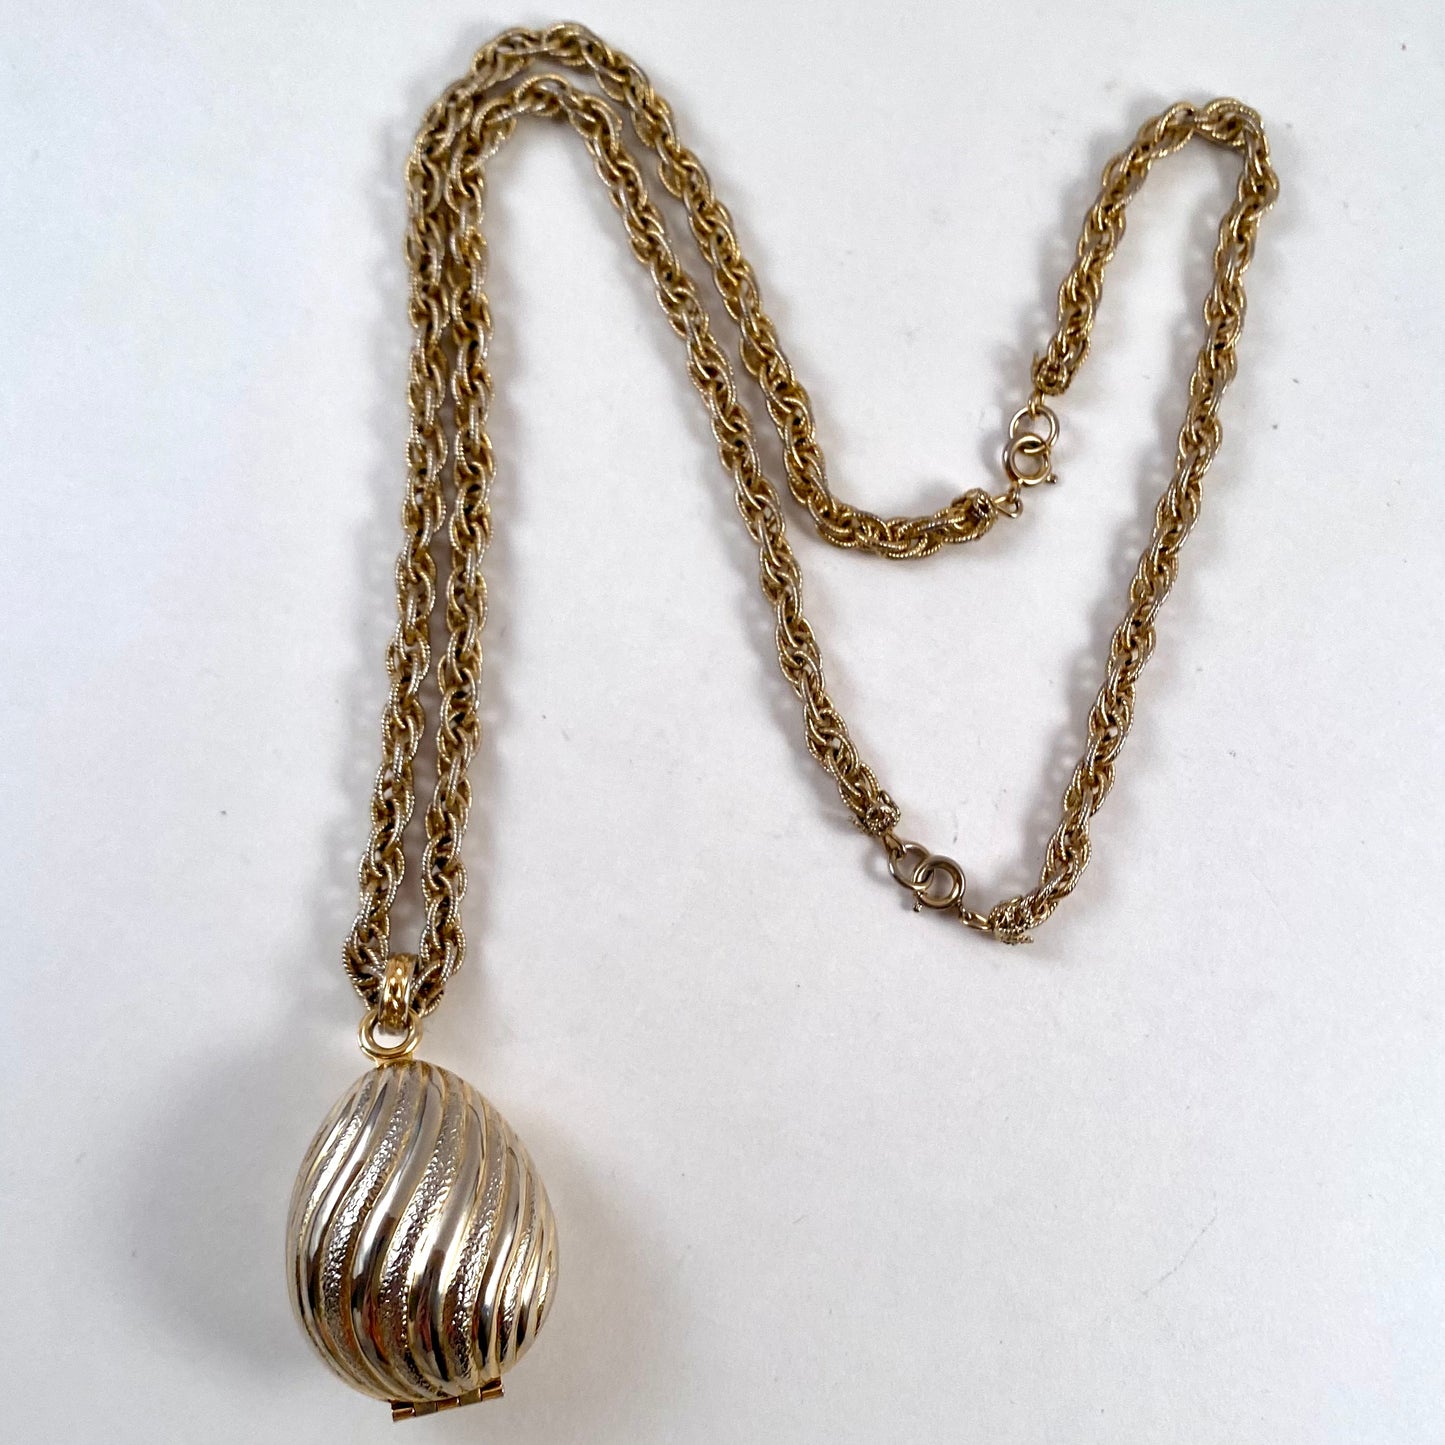 1968 Avon Golden Charmer Glace Necklace